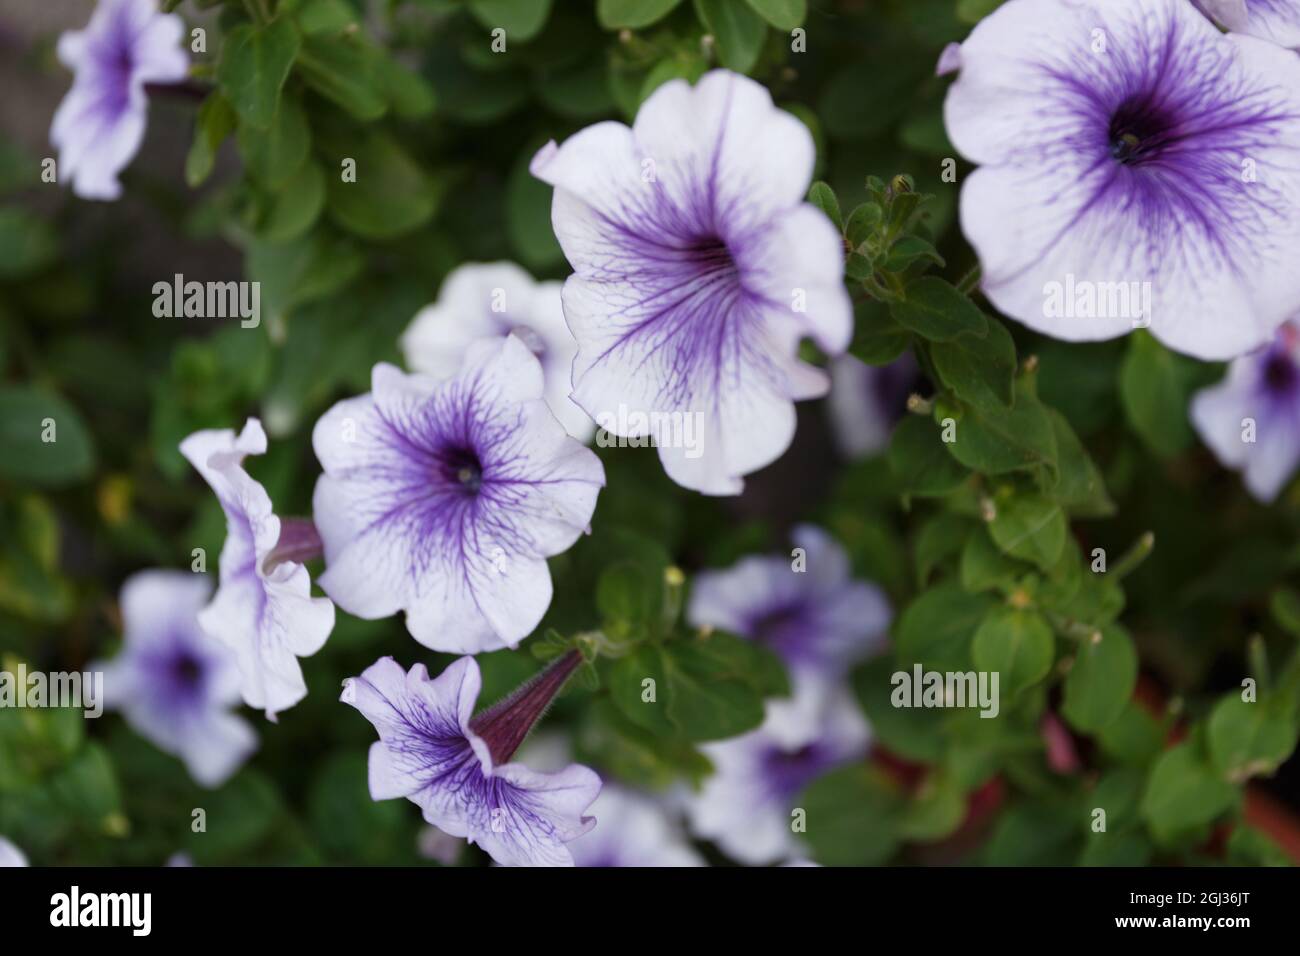 Purple petunia flowers in the garden close up Stock Photo